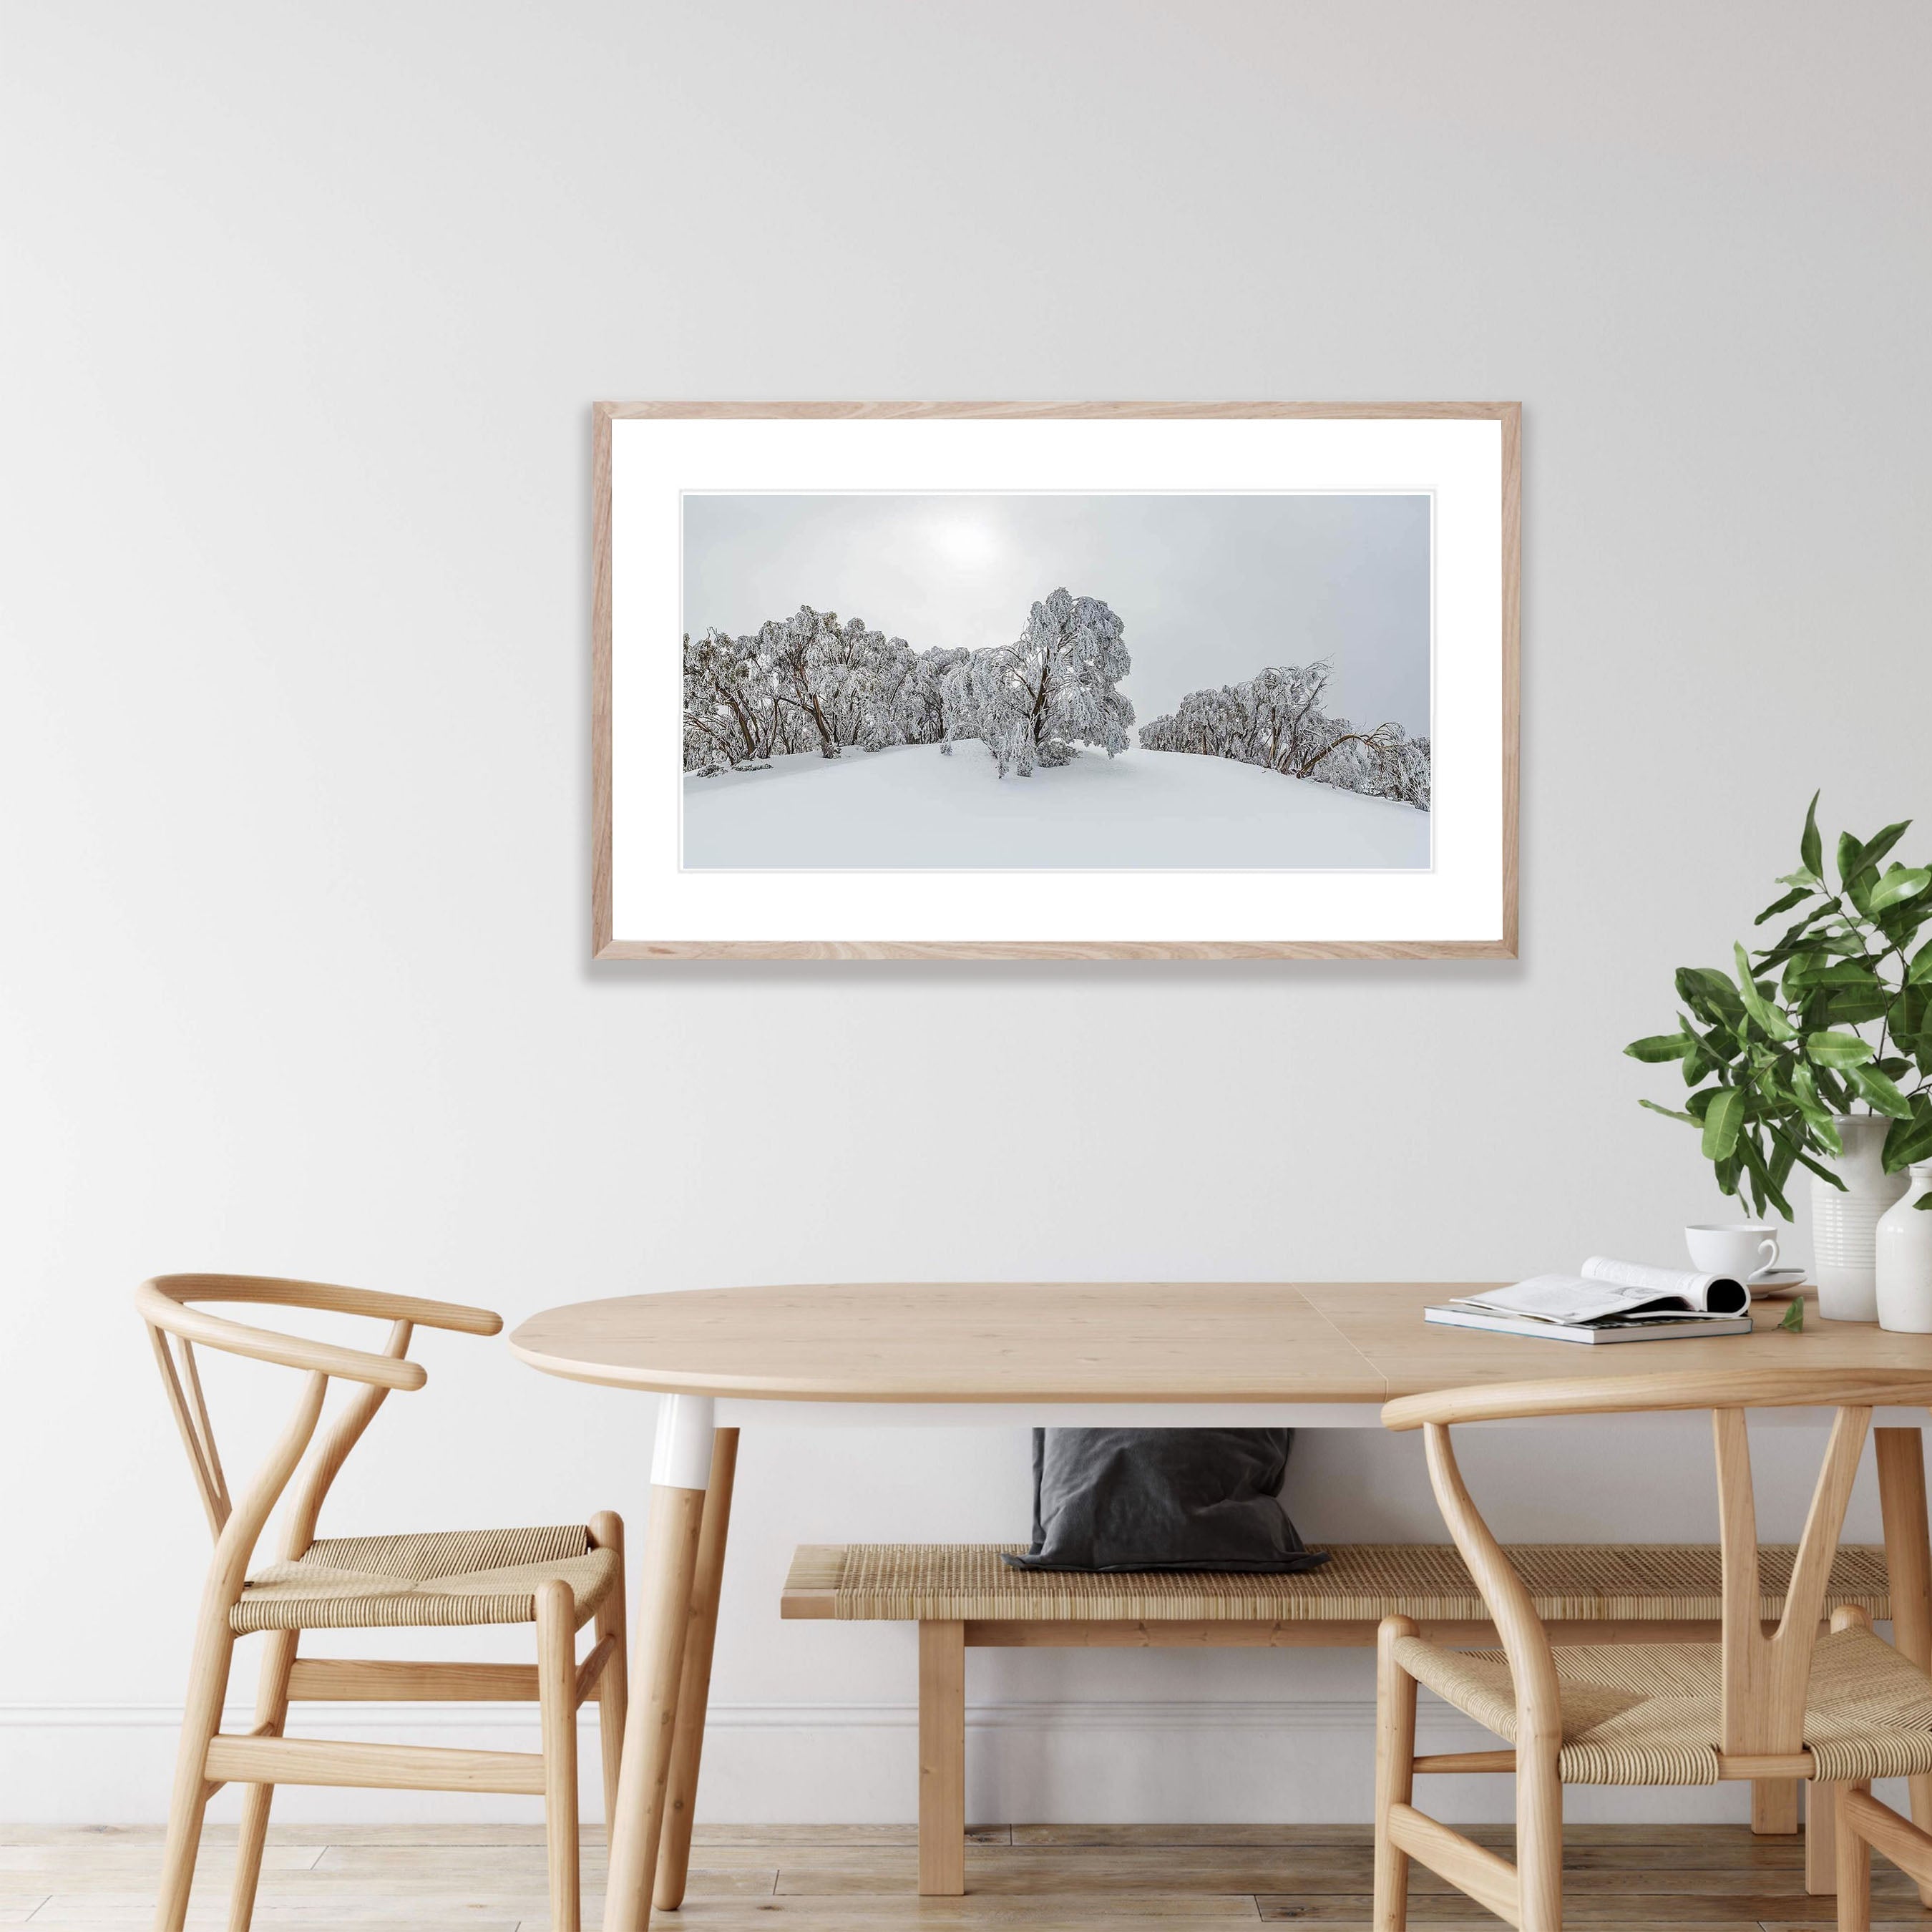 ARTWORK INSTOCK - Ice Tree, Mount Baw Baw - Victorian High Country - 150 x 50cms Canvas Raw Oak Print